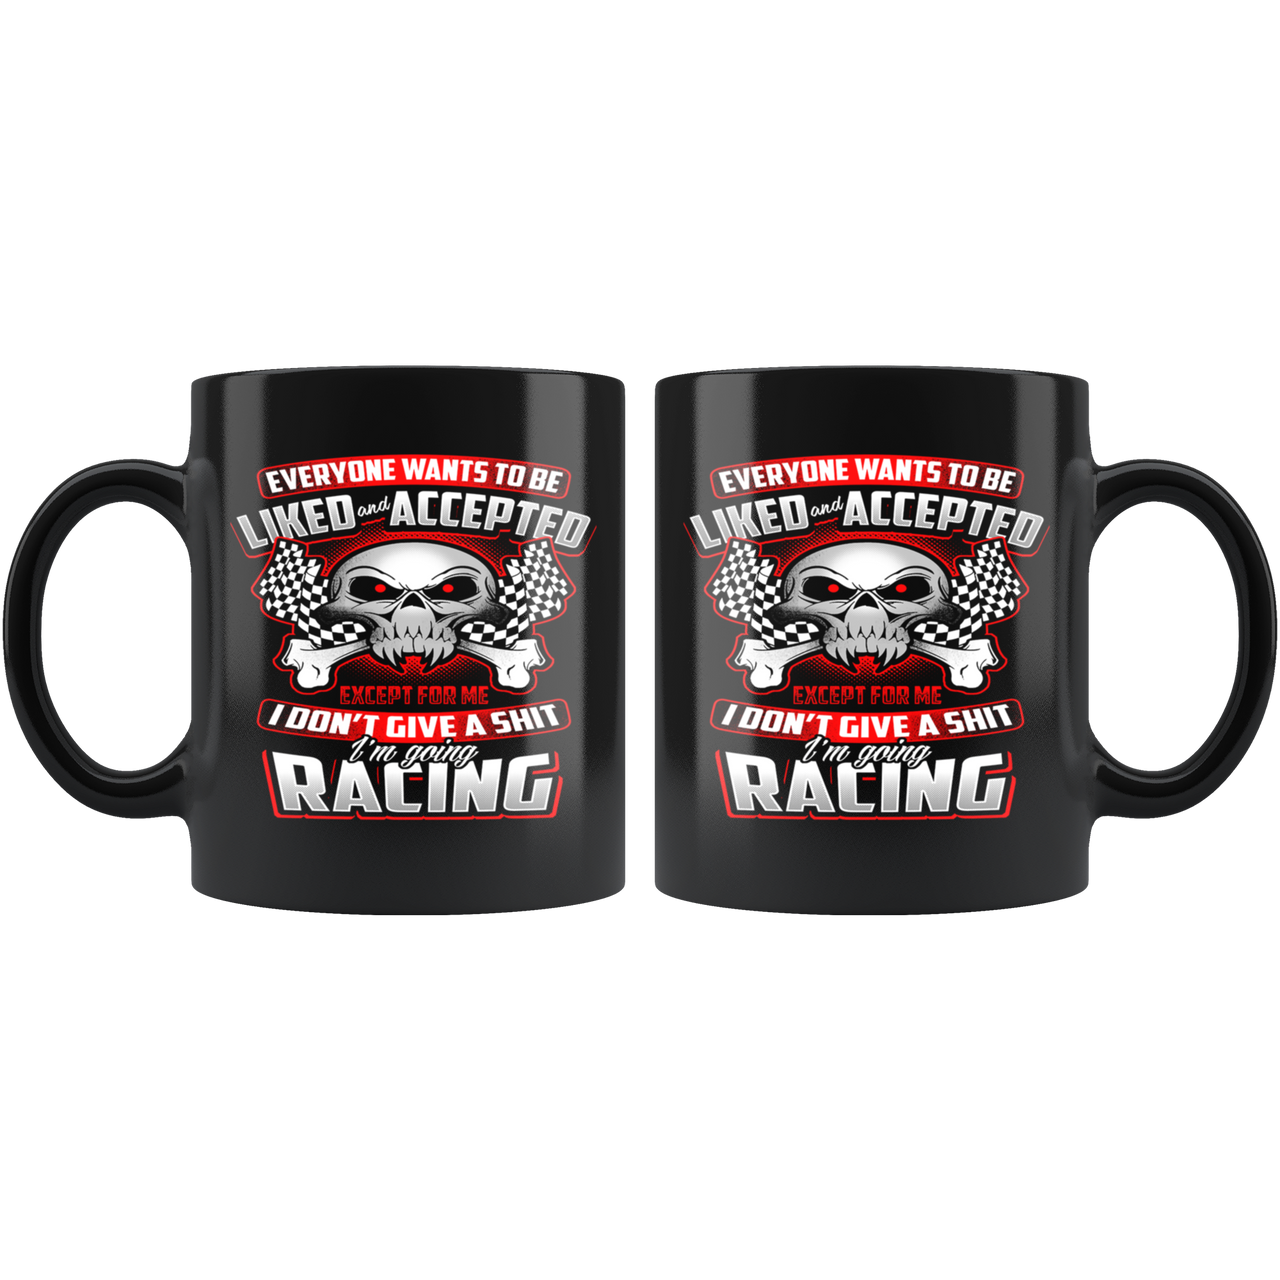 Everyone Wants To Be Liked Or Accepted Except Me I don't Give A Sh$t I'm Going Racing Mug!